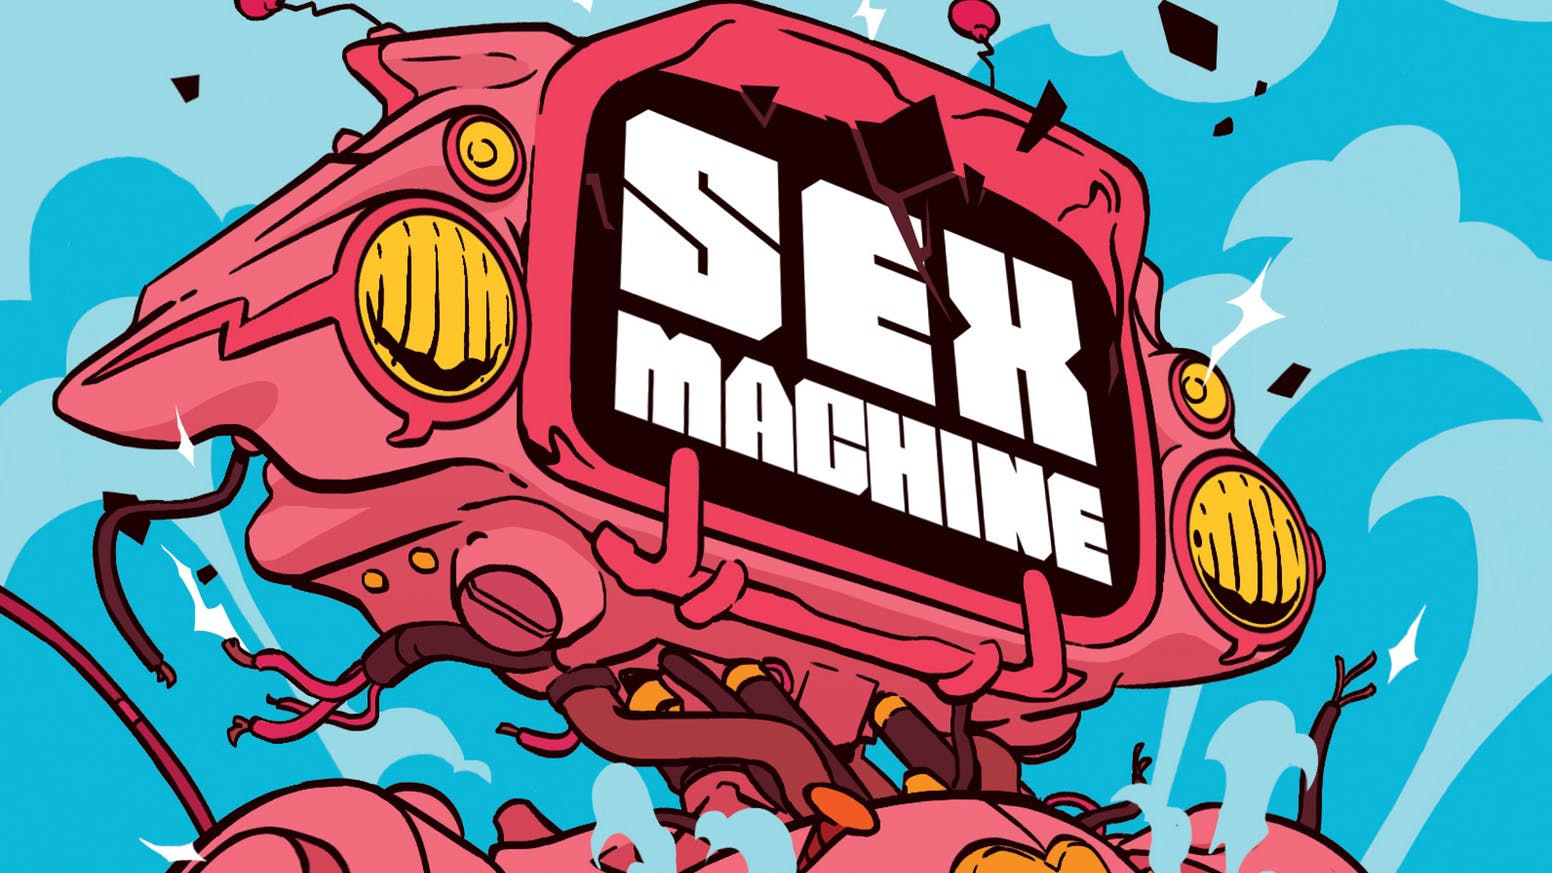 This robot porn comic is one of the most popular projects on Kickstarter